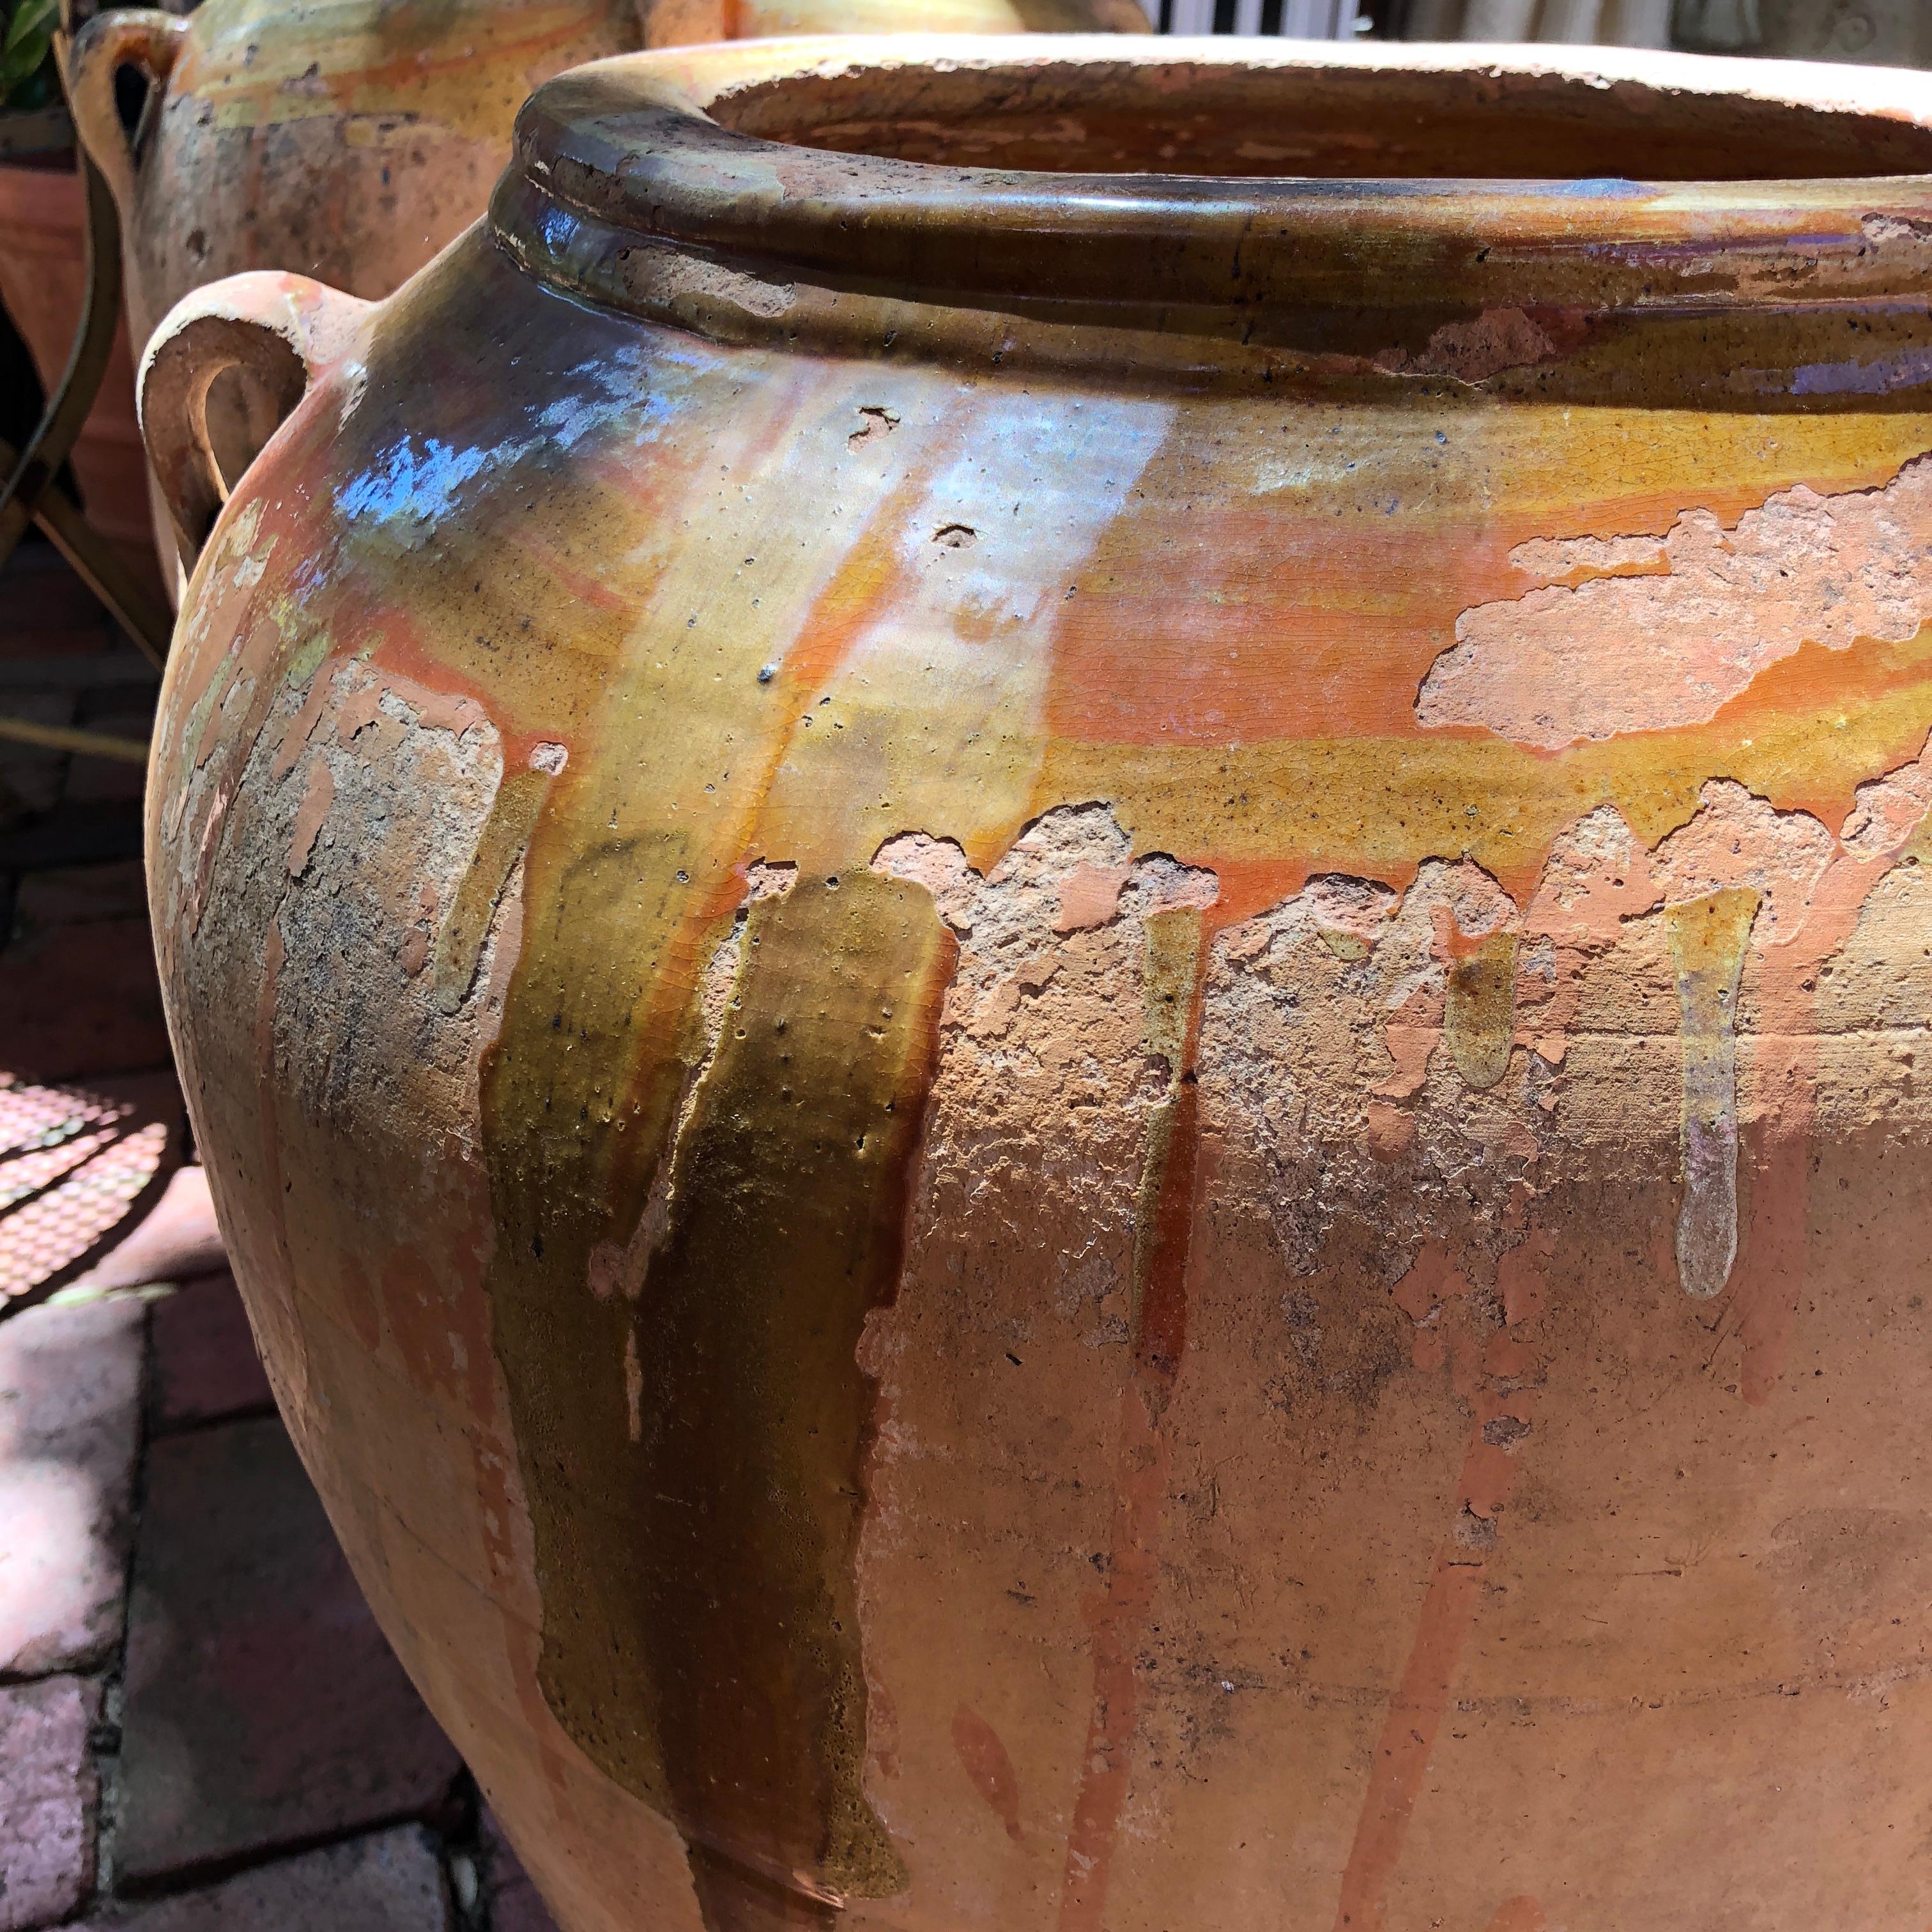 Featuring the signature South of France antique confit pot glaze, this rustic terracotta urn would make an exceptional jardinière or interior decorative item in any Province styled home. The patina of this 19th century urn ranges from a warm sienna